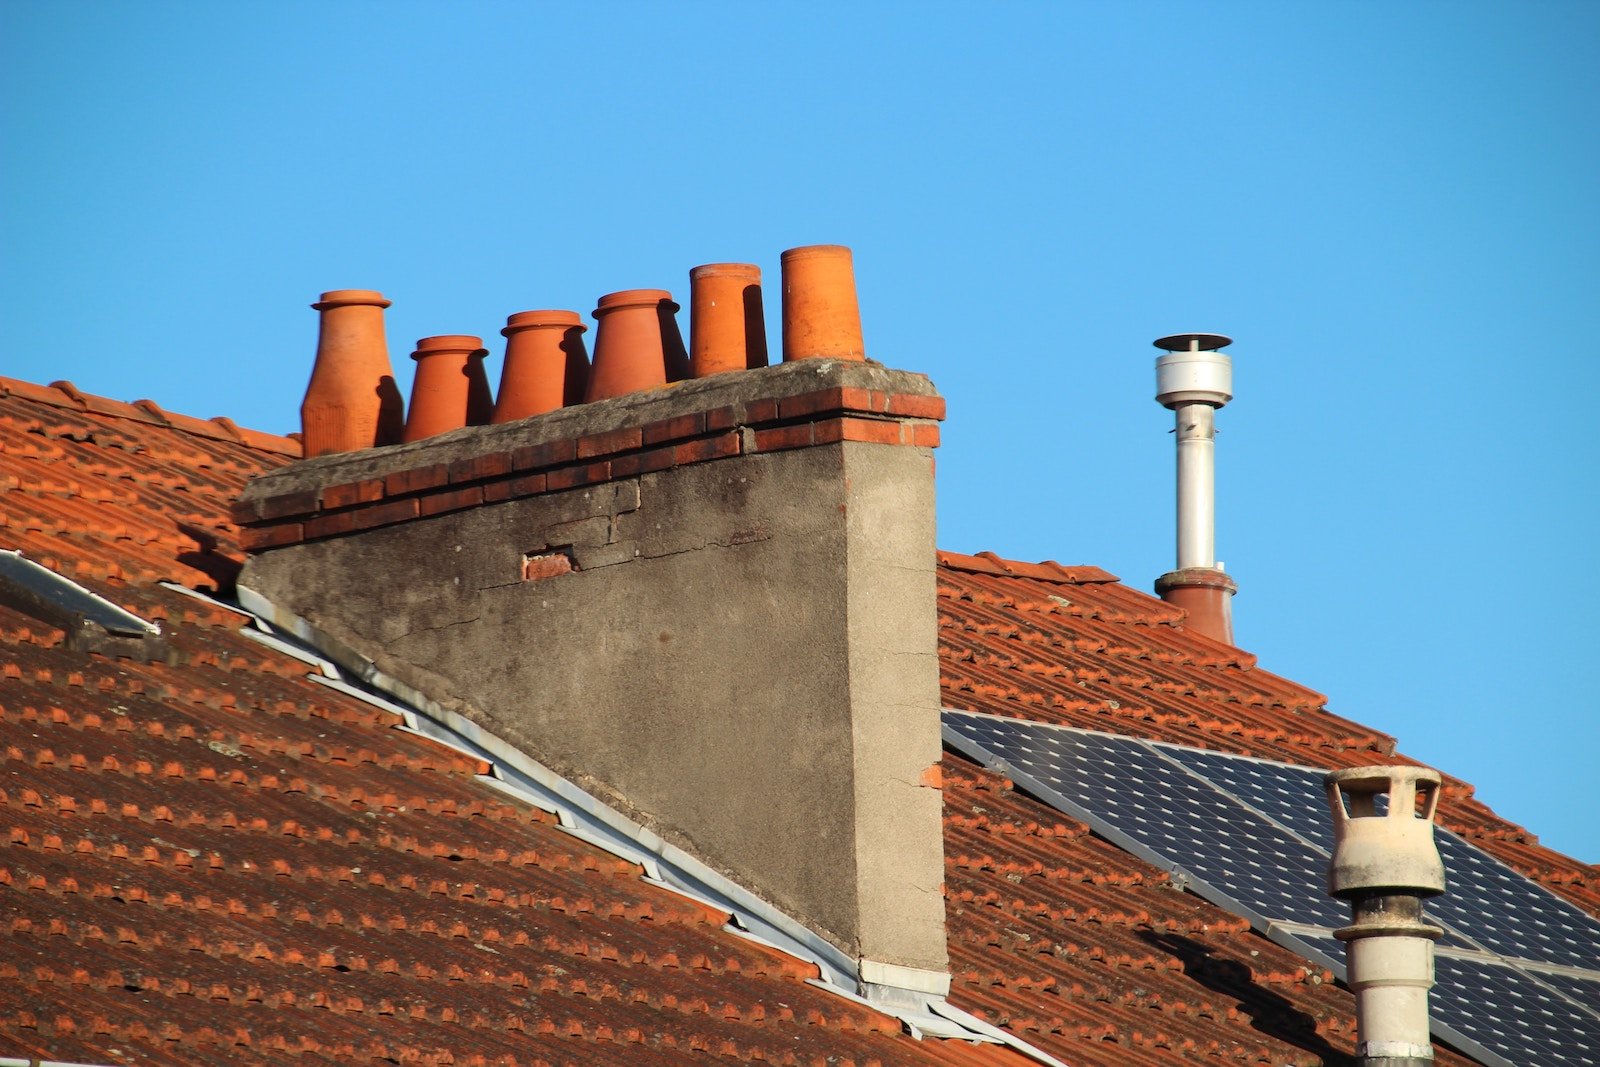 Roof maintenance checklist: are there any rust spots on the flashing?